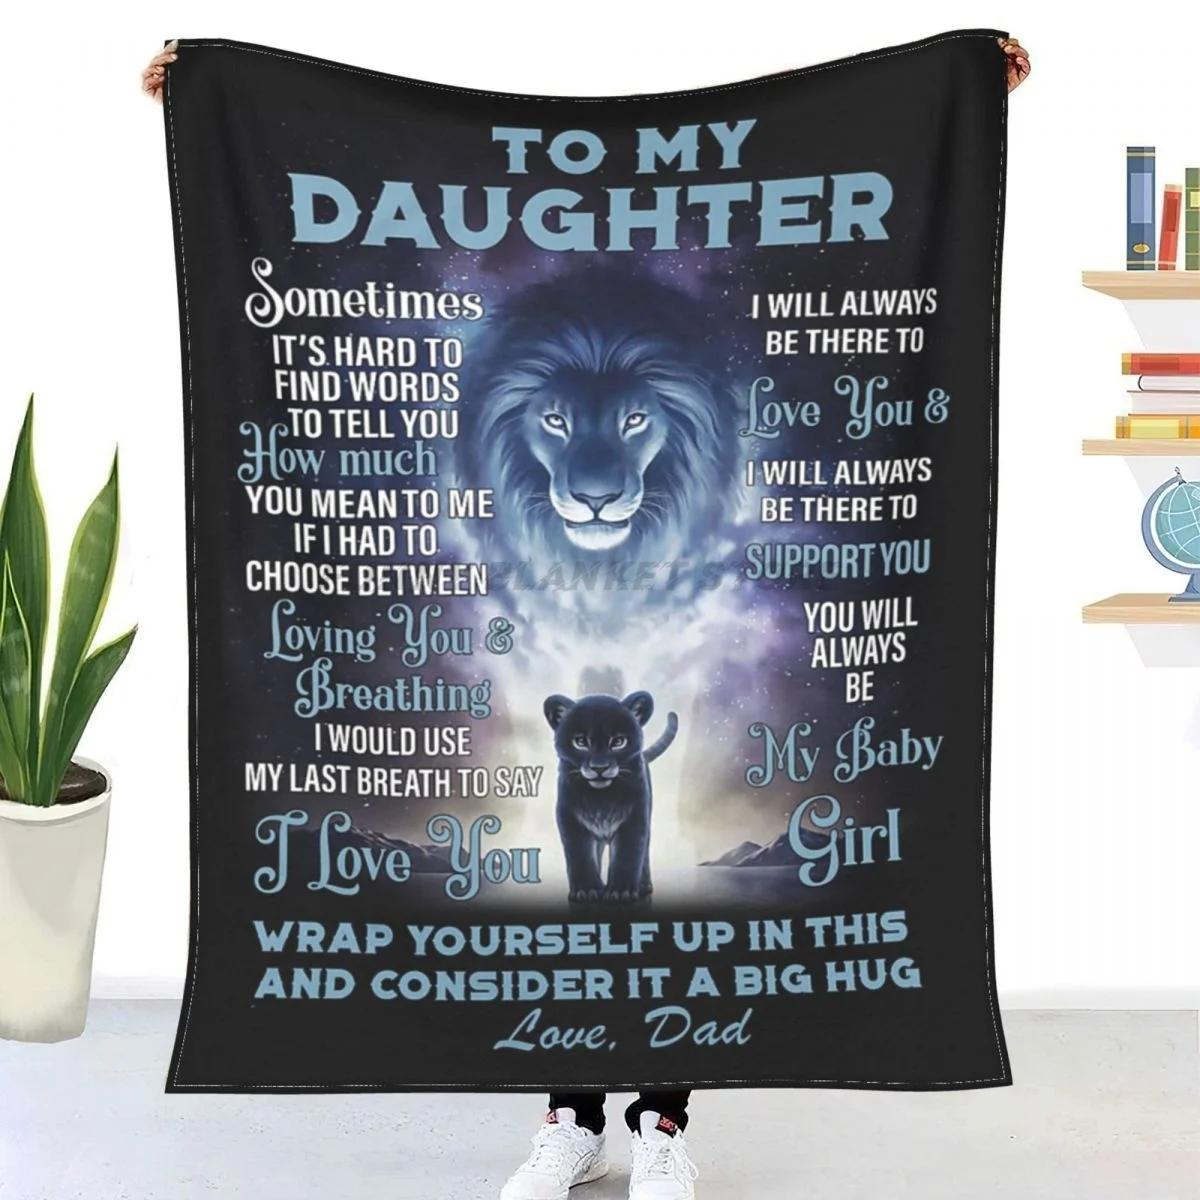 

MOM TO DAUGHTER SOMETIMES IT S HARD TO FIND WORDS TO TELL YOU HOW MUCH I LOVE YOU BlanketsFleece Throw Blanket